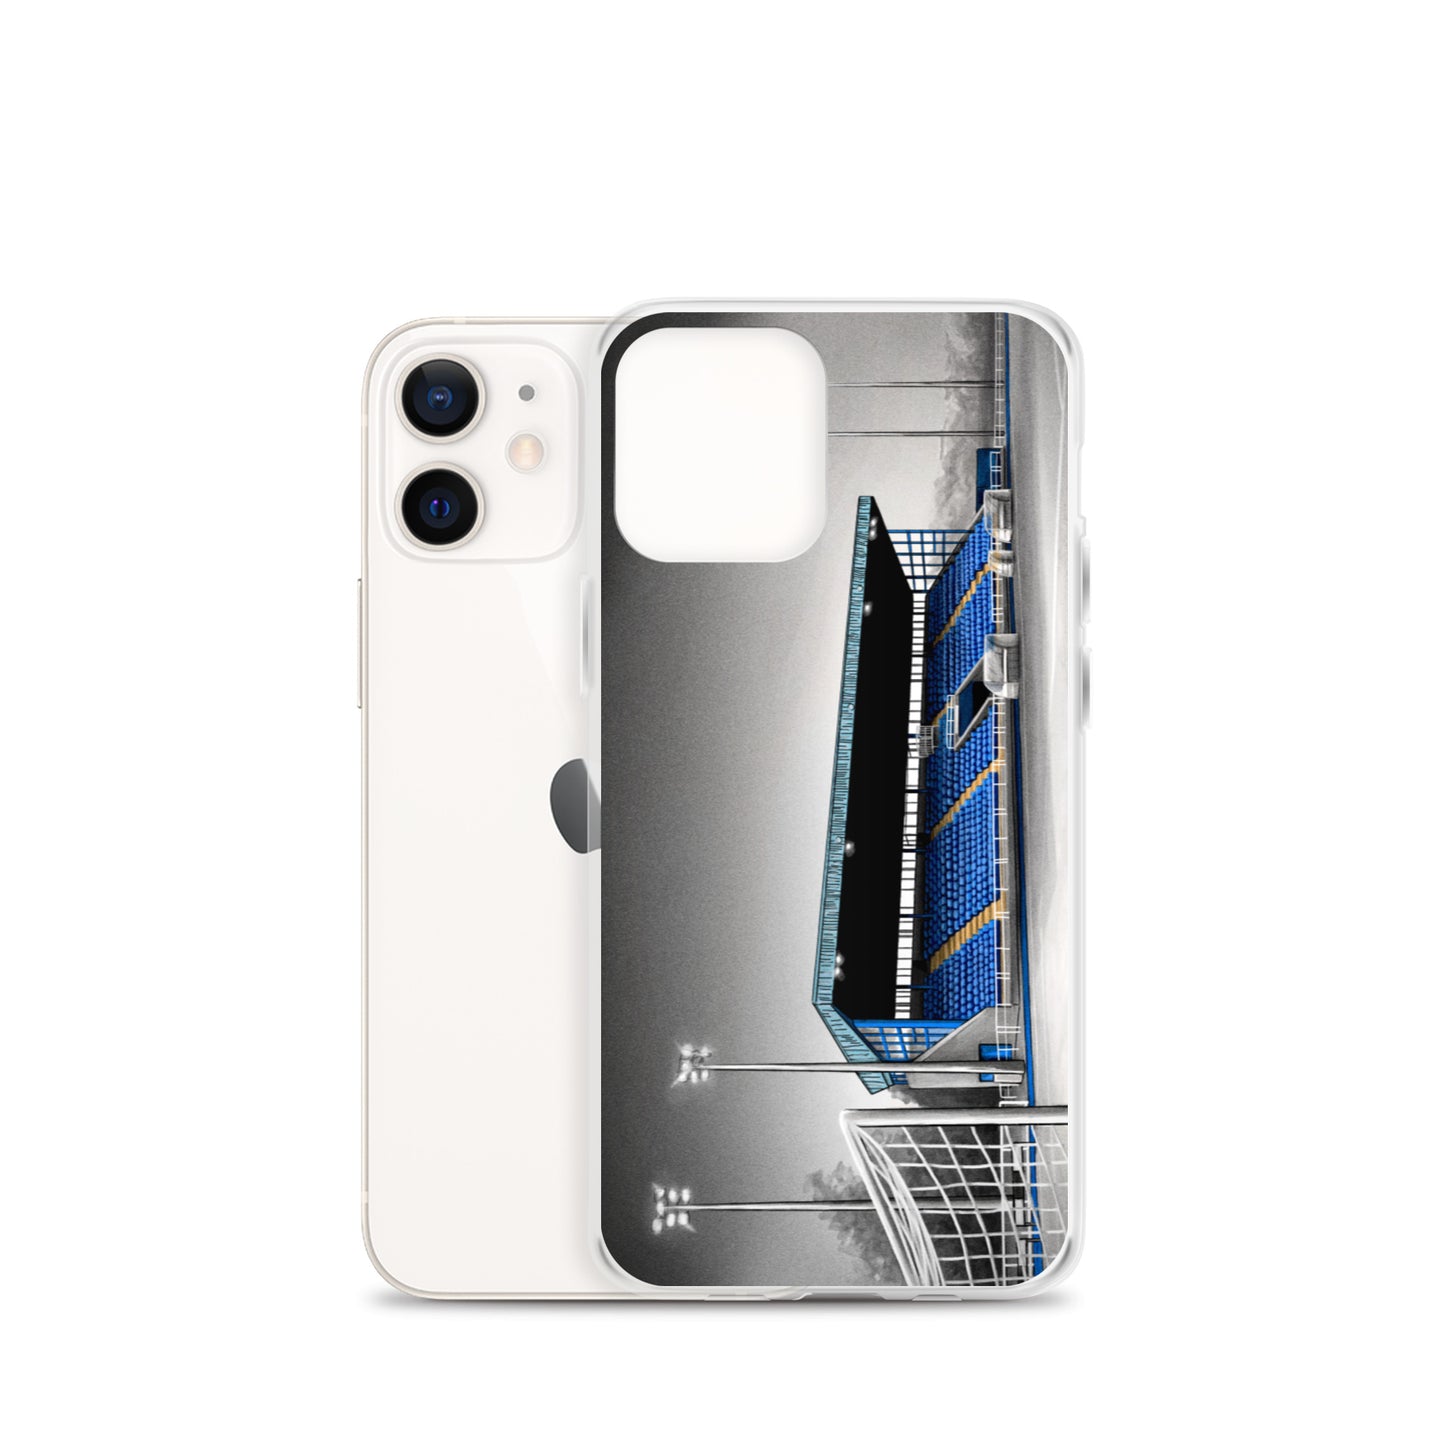 The RSC Waterford FC iPhone Case